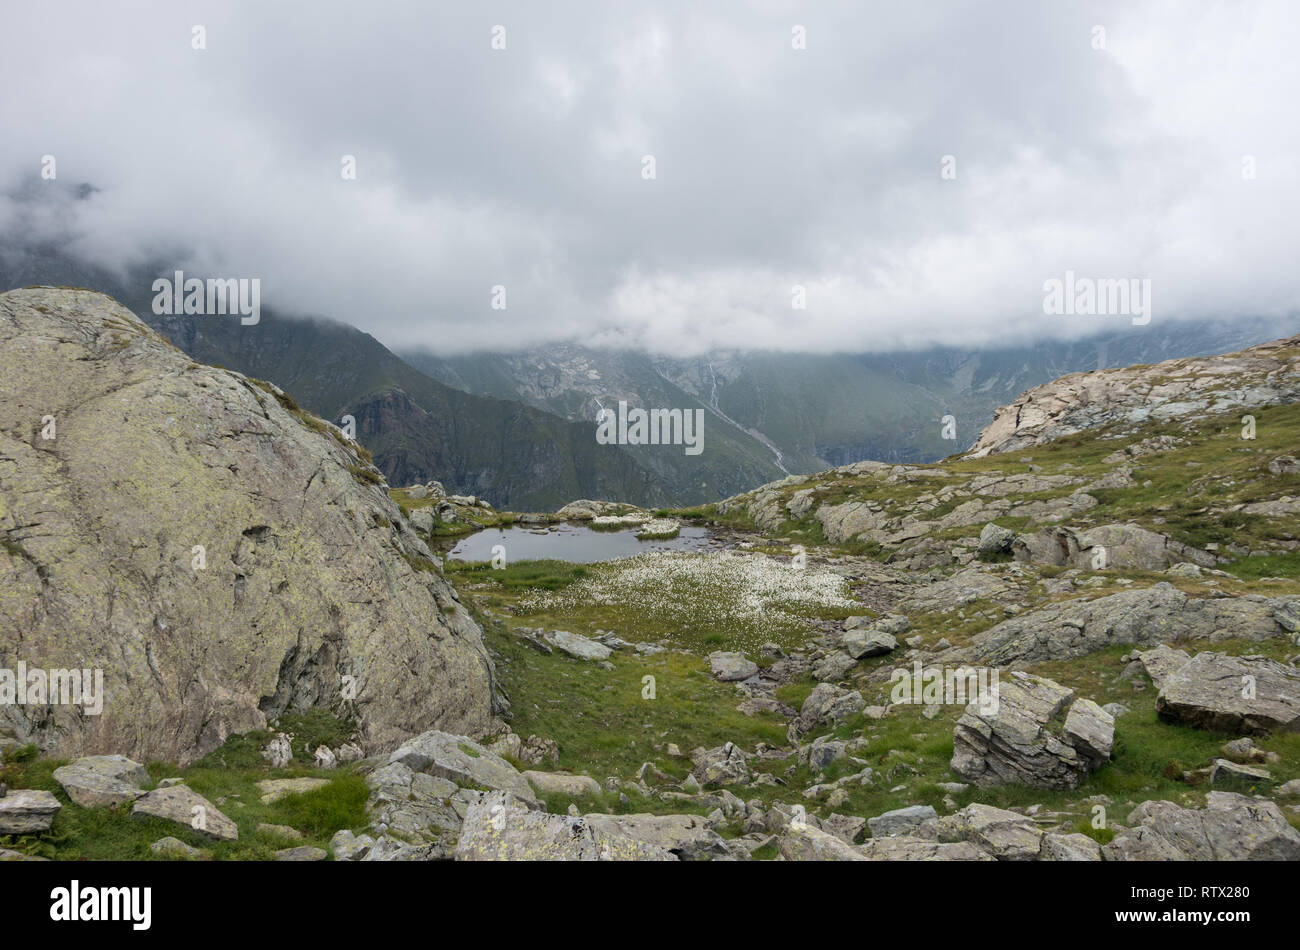 View to valley Bors from mountain slope with litile pond , Alagna Valsesia area, Italy Stock Photo